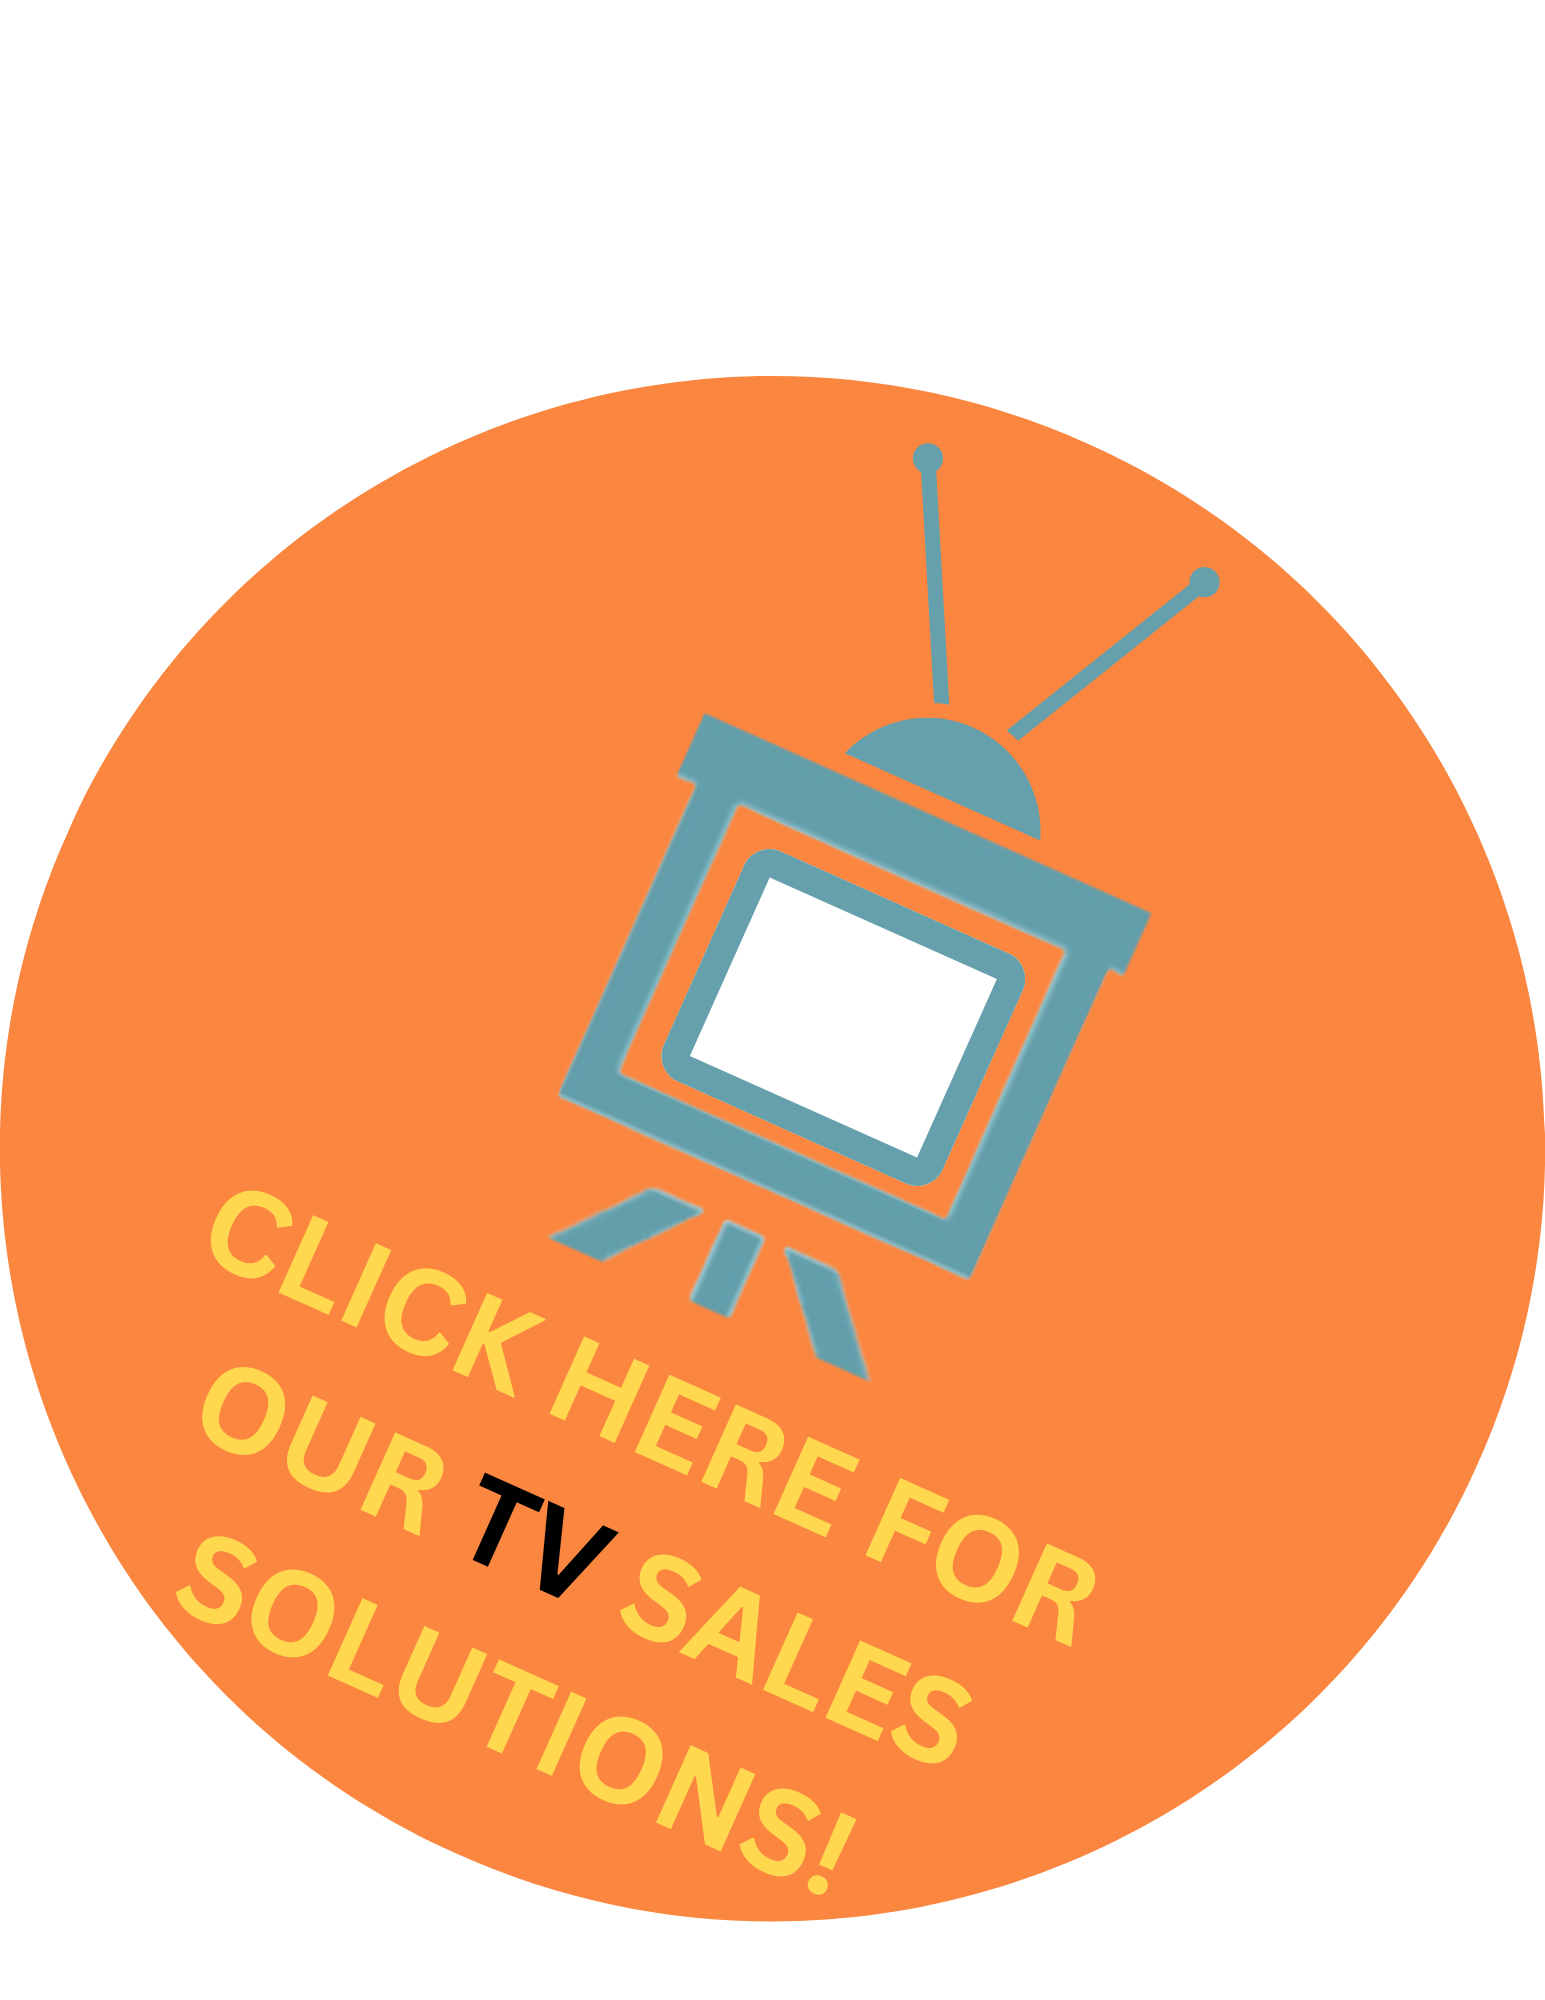 Check out our TV Sales Solutions Services